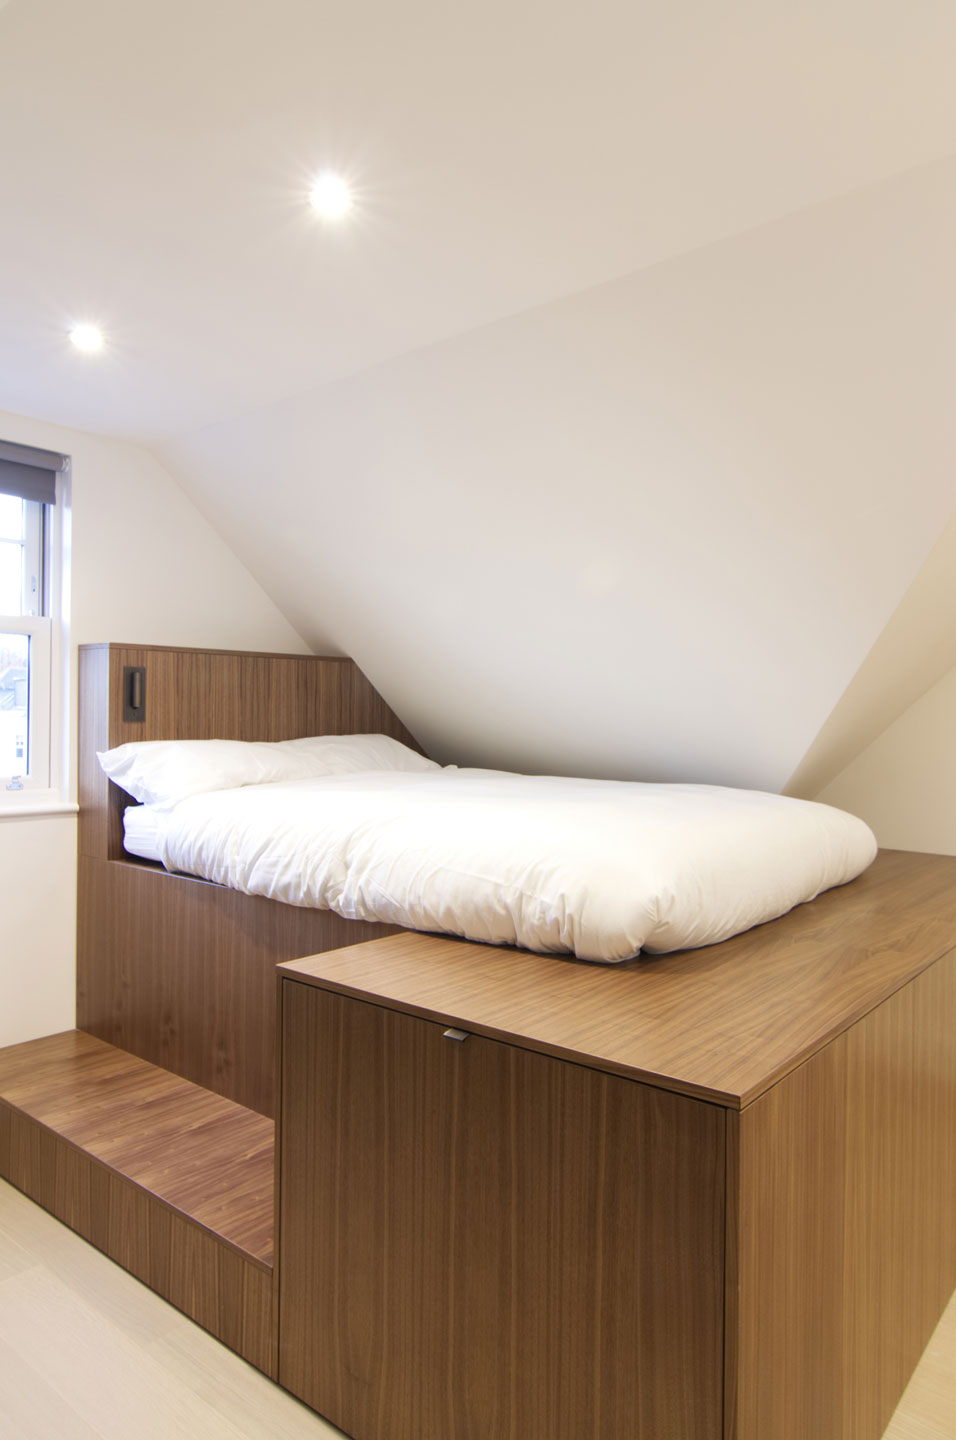 Wooden units inside the apartment also bring ample storage along with them